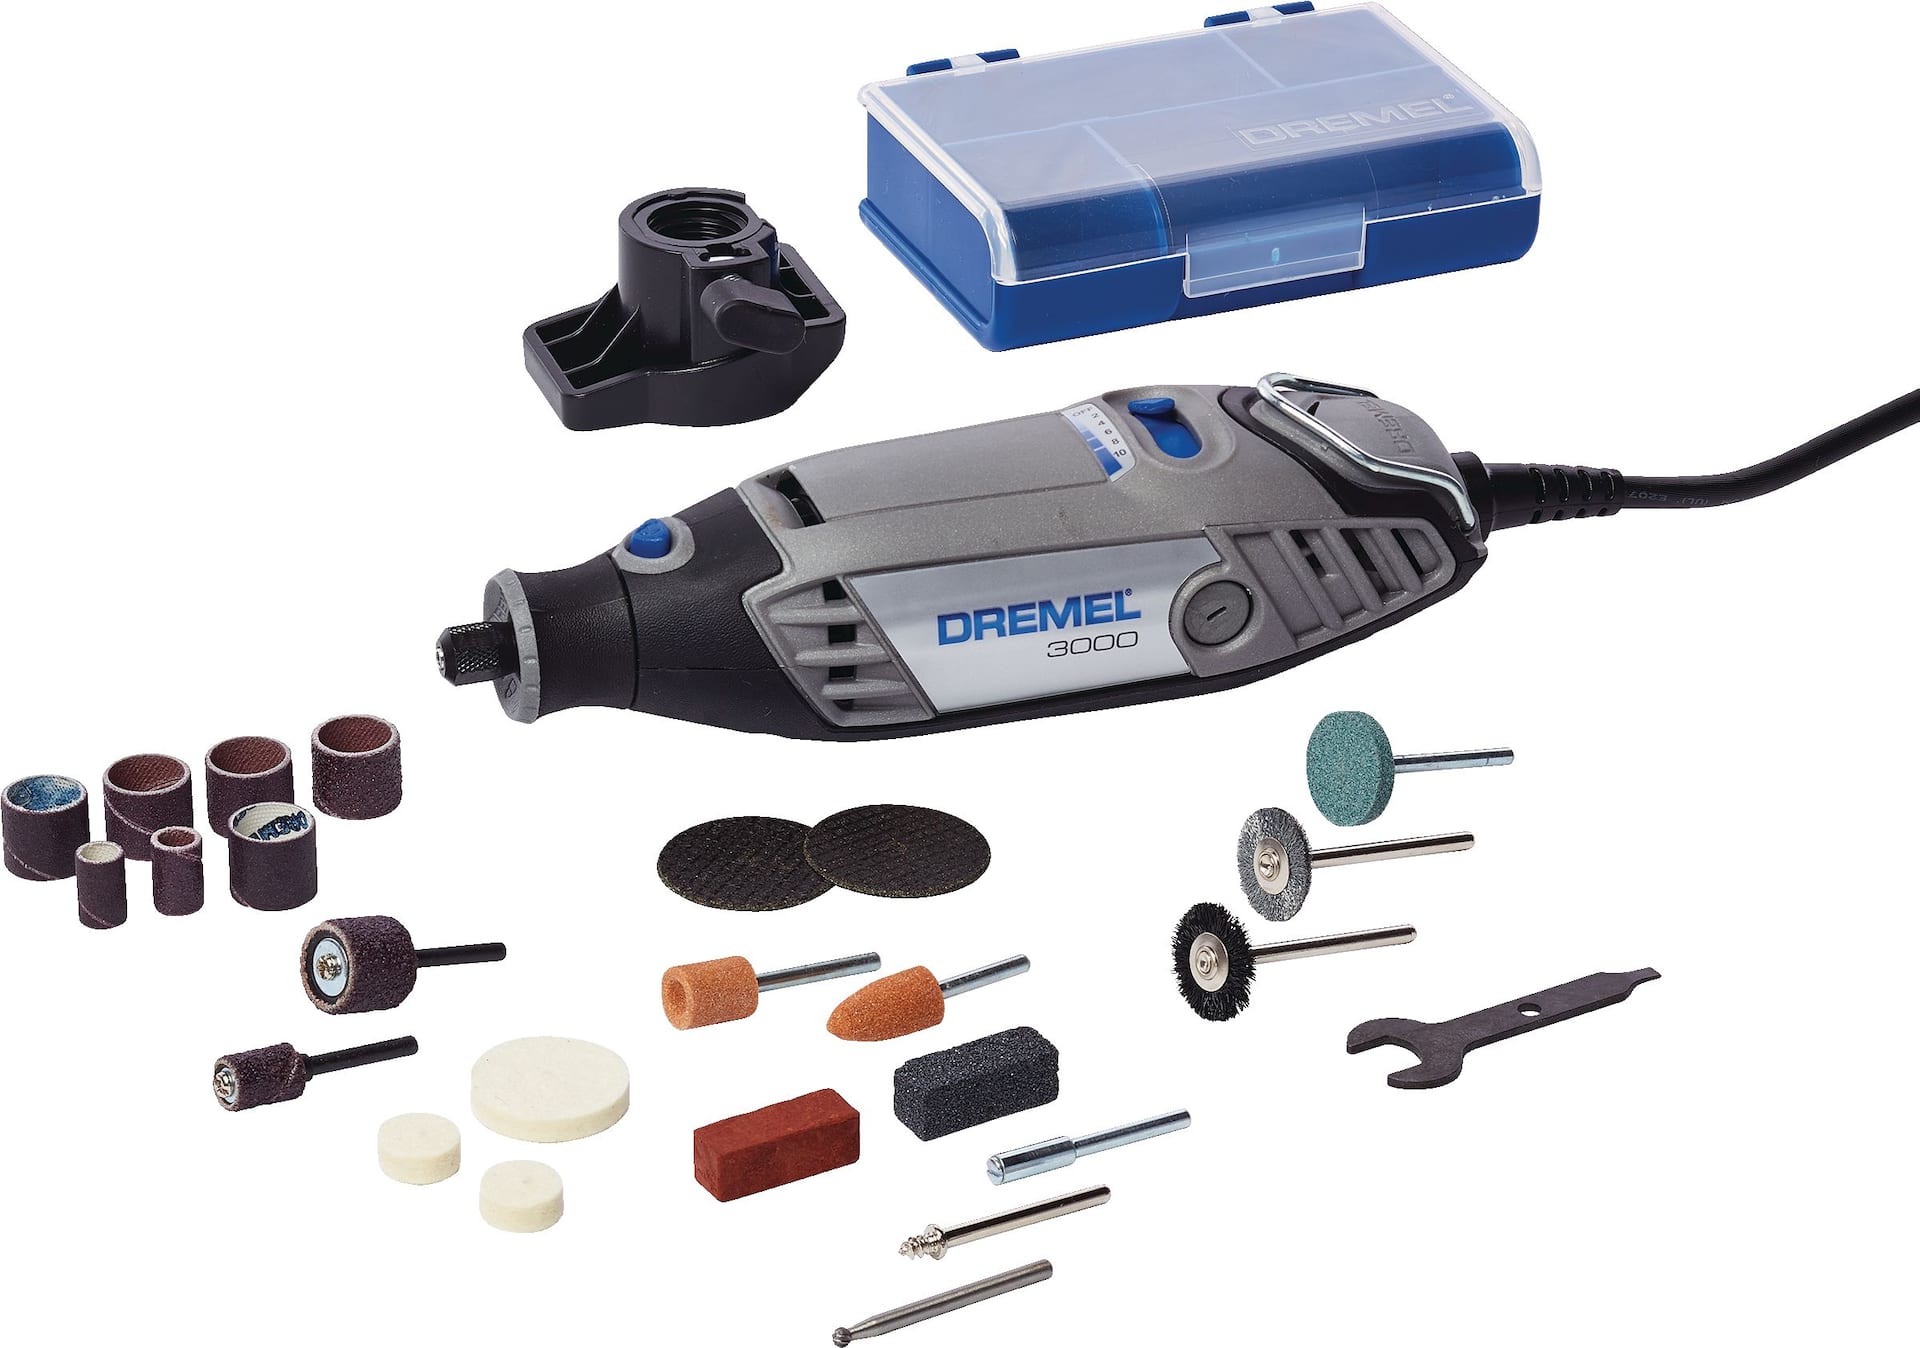 Dremel 3000-1/24 1.2A Variable Speed Rotary Tool Kit with